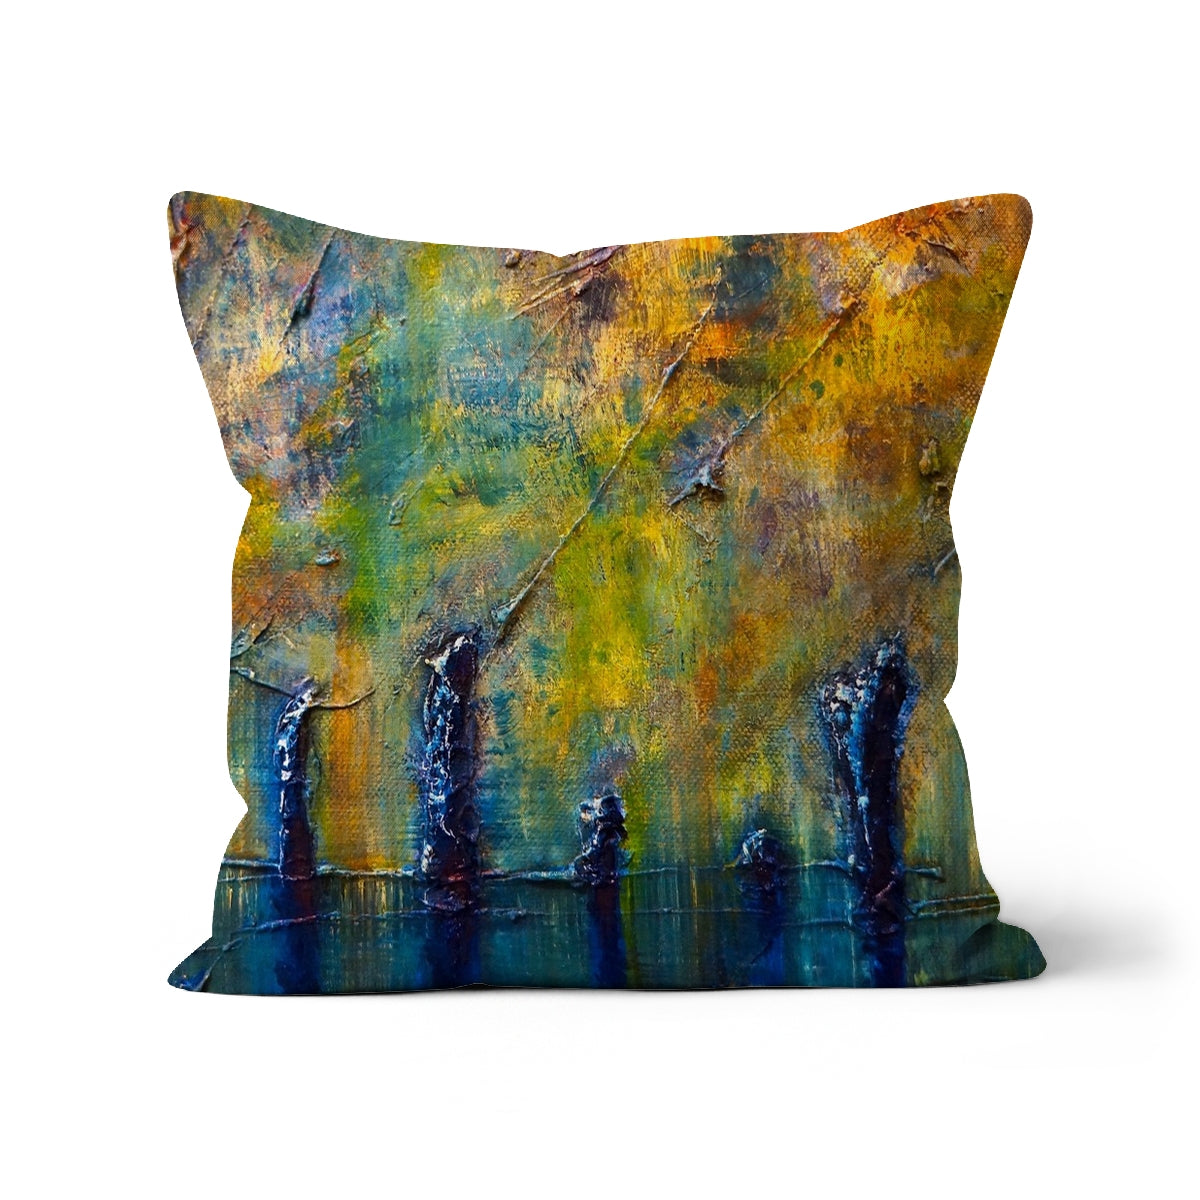 Stenness Moonlight Orkney Art Gifts Cushion-Cushions-Orkney Art Gallery-Canvas-24"x24"-Paintings, Prints, Homeware, Art Gifts From Scotland By Scottish Artist Kevin Hunter